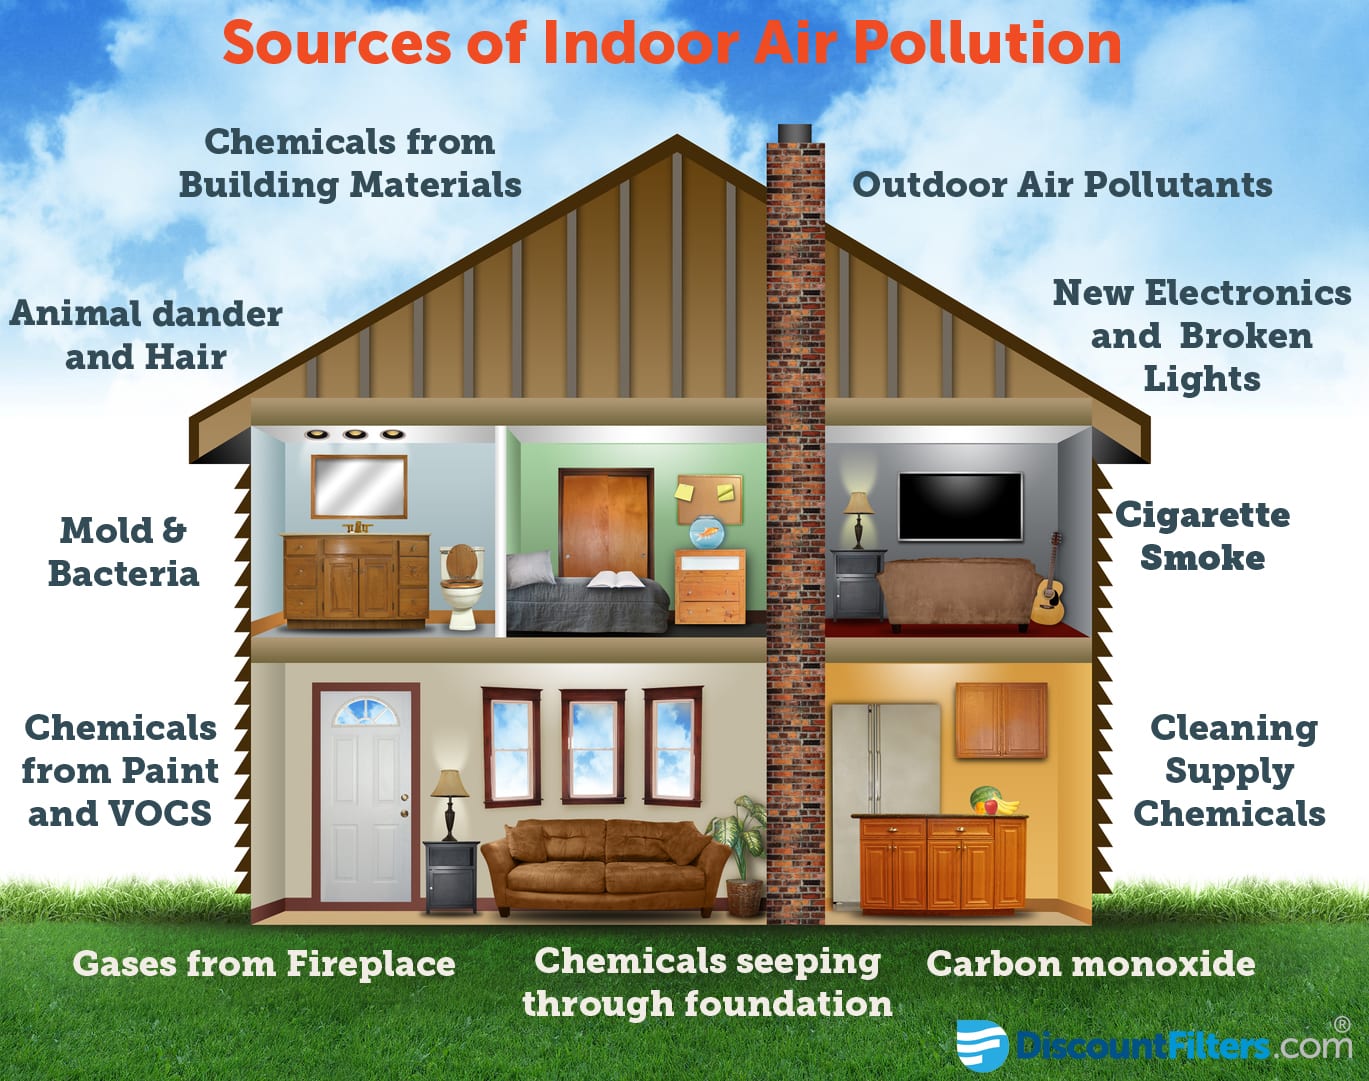 Indoor air pollution sources.jpg